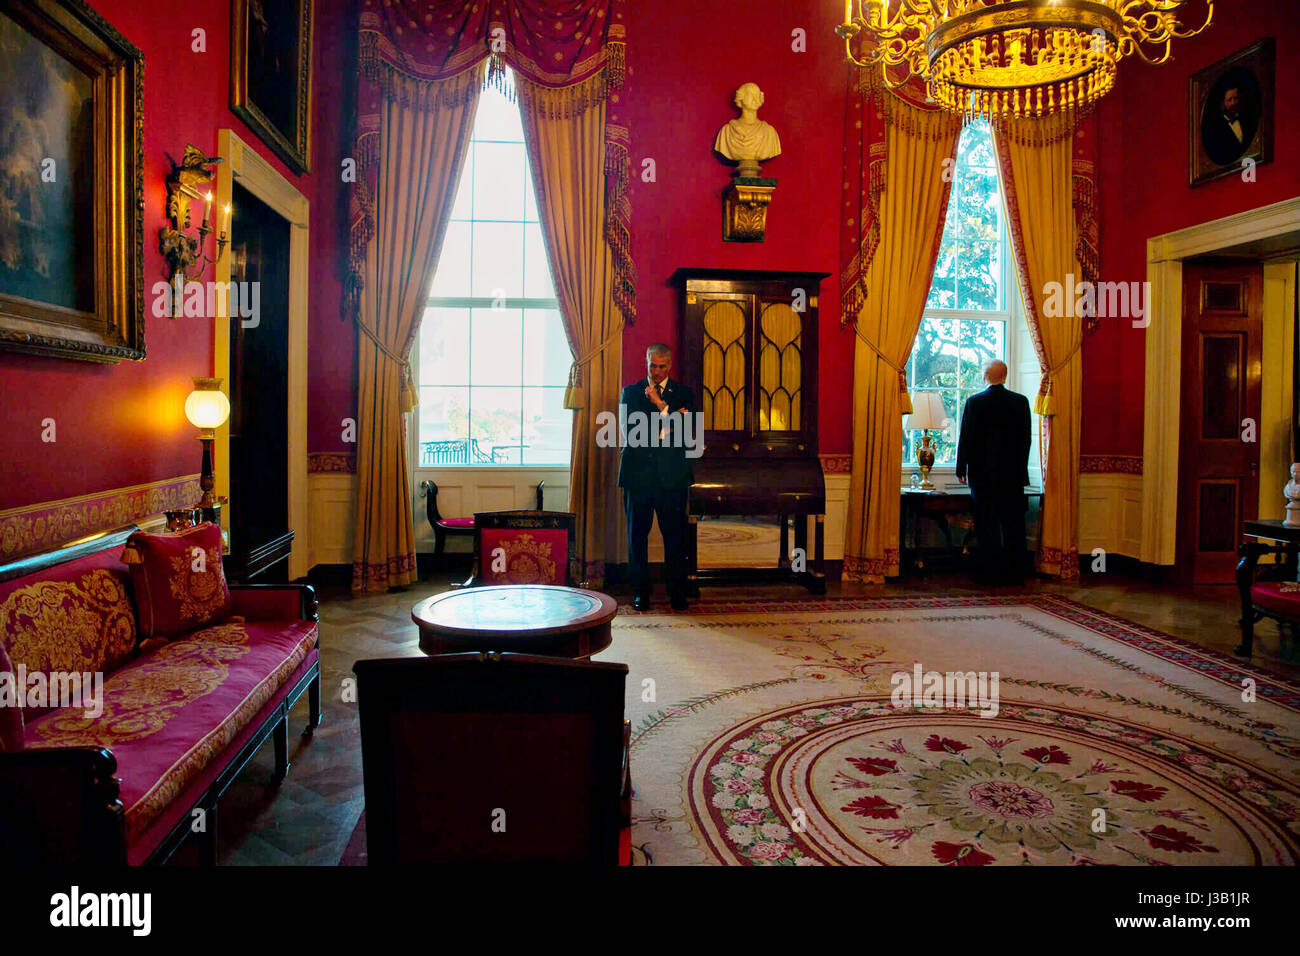 U.S. President Donald Trump, right, looks out the window from the Red Room on the State floor of the White House prior to joining  guests for an evangelical advisory board dinner May 3, 2017 in Washington, D.C. Stock Photo